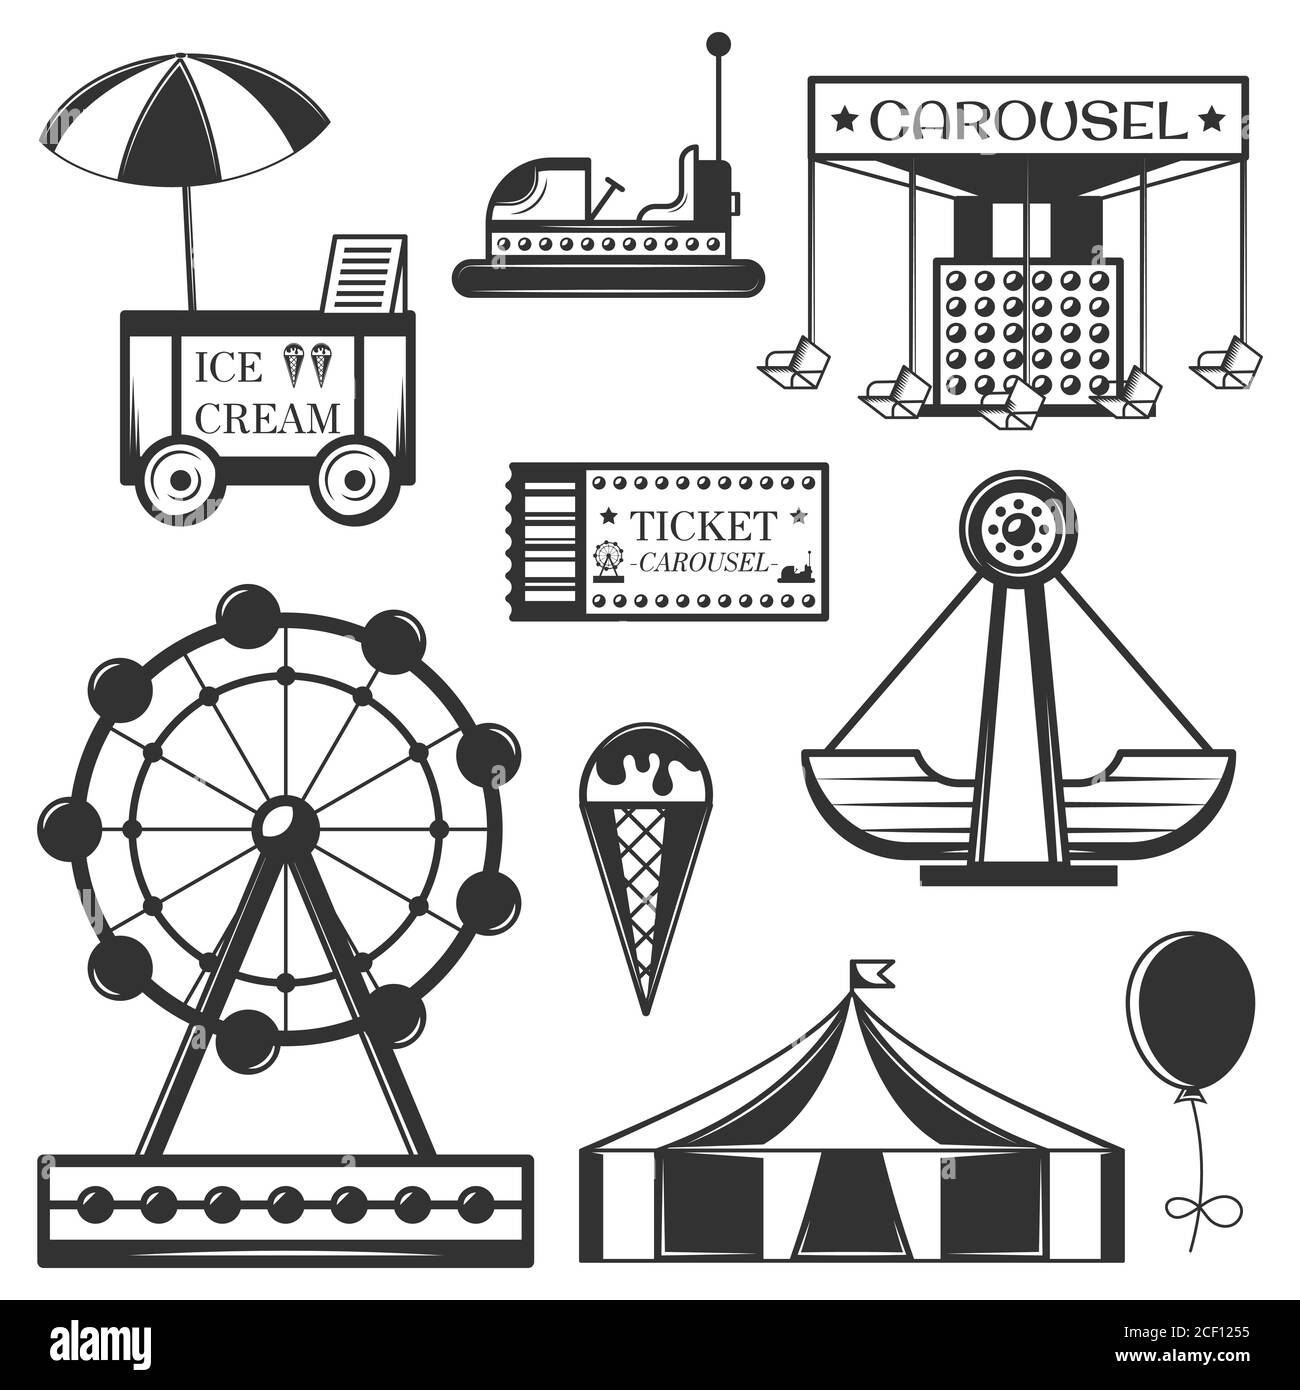 Vector set of amusement park isolated icons and objects. Attractions, carousel, wheel, ice cream cart. Stock Vector